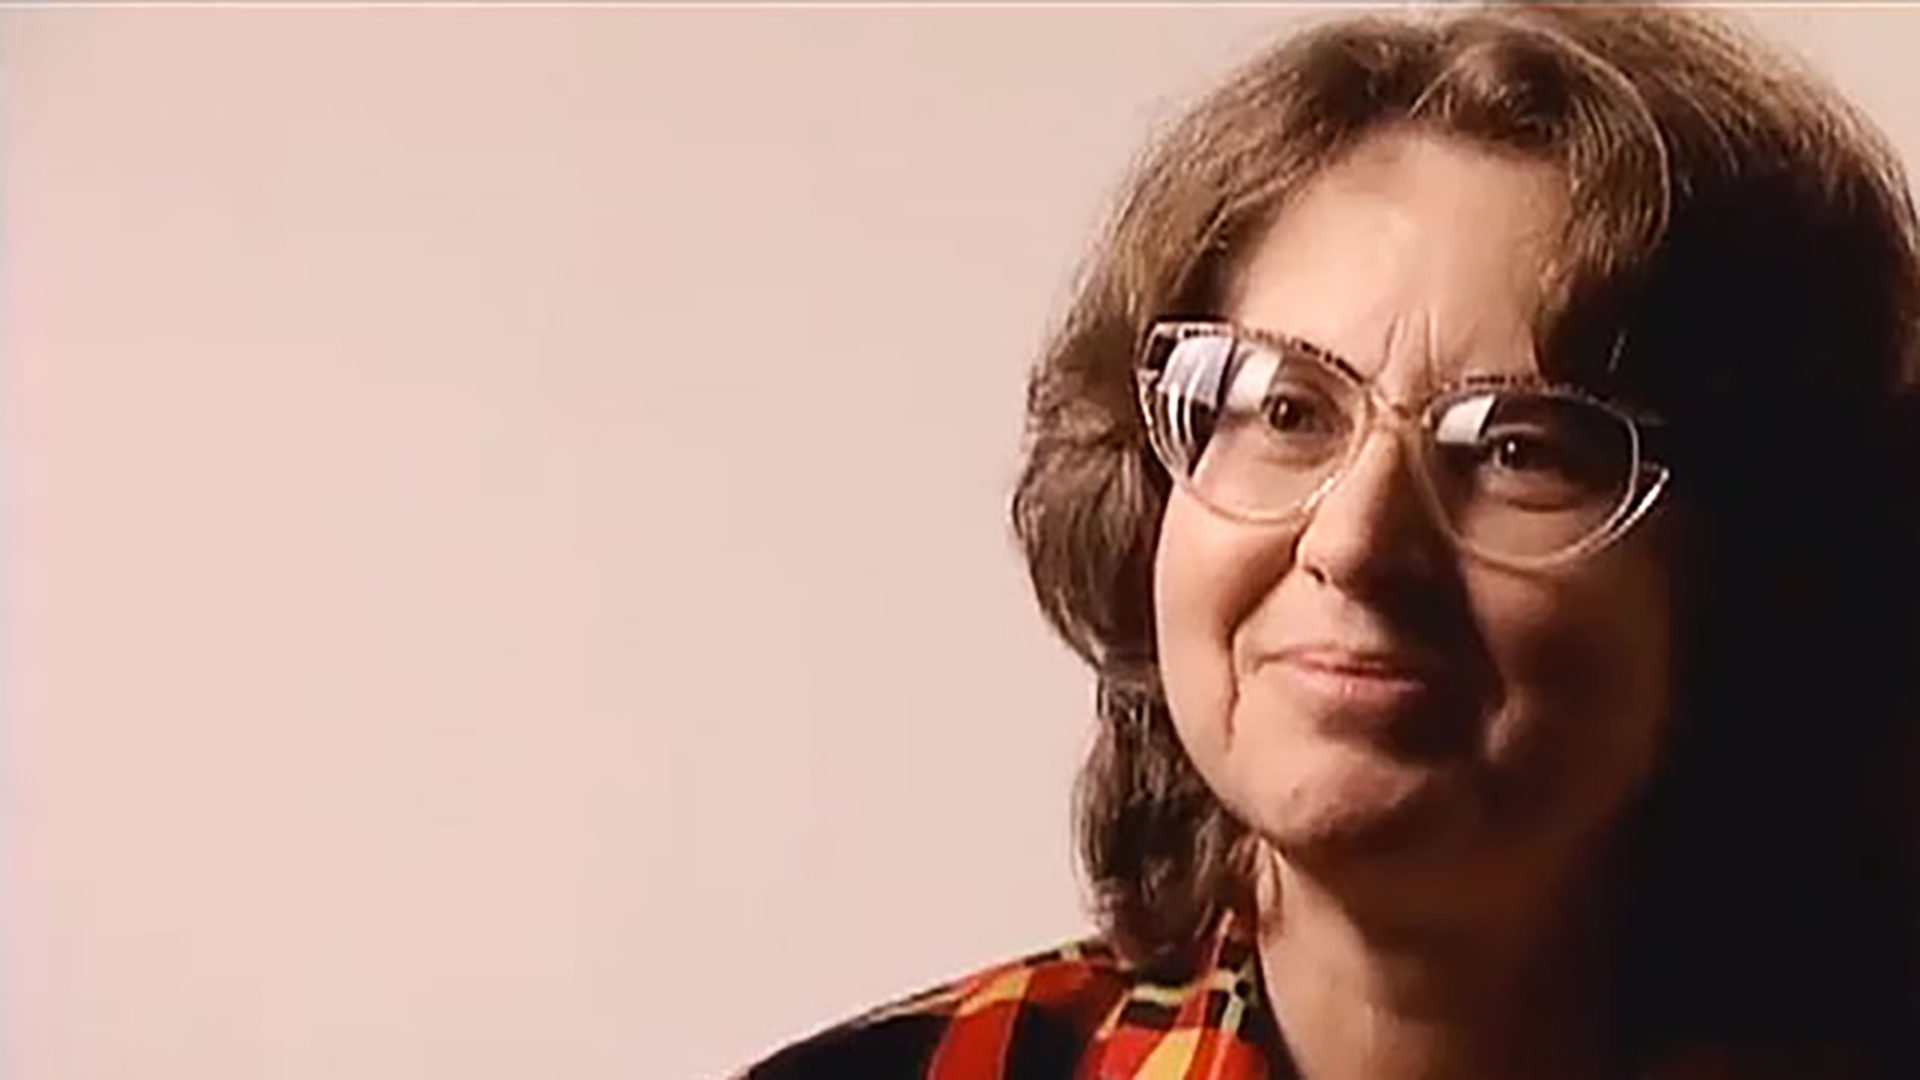 A middle-aged woman wearing glasses and a plaid shirt is interviewed against a neutral color background.